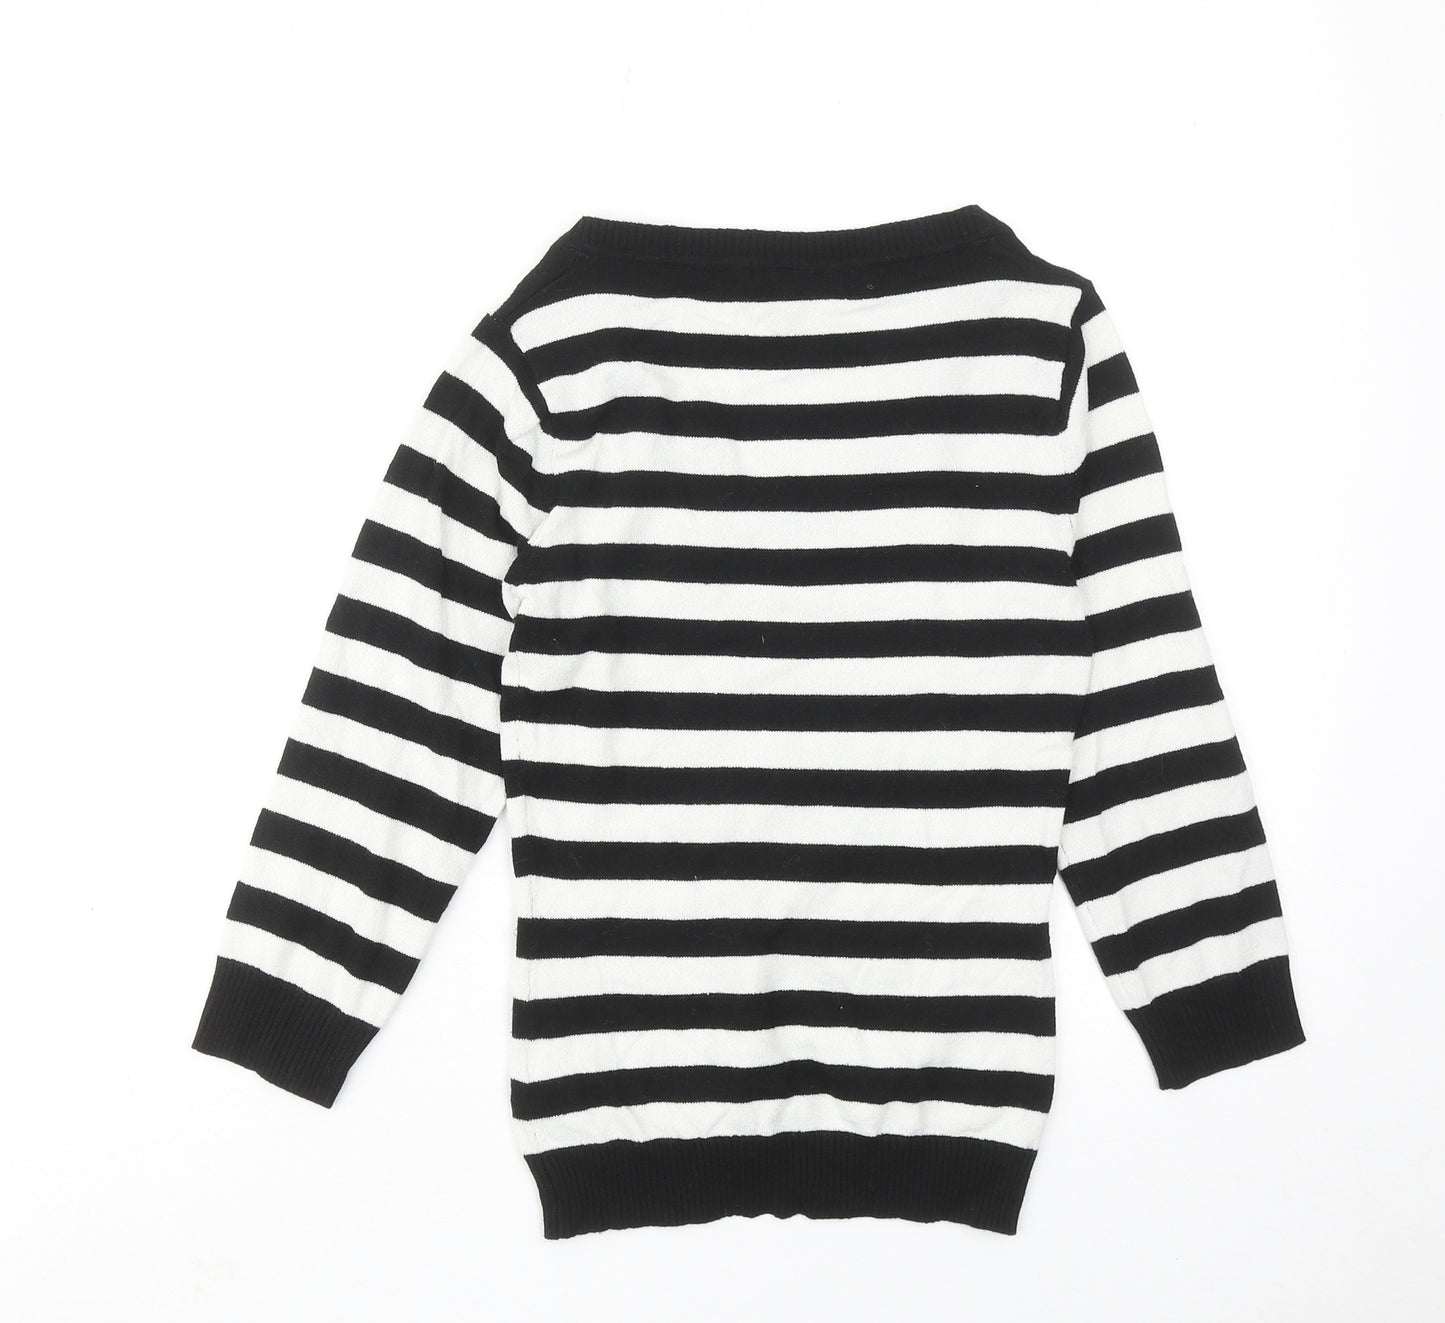 H&M Womens Black V-Neck Striped Acrylic Pullover Jumper Size XS